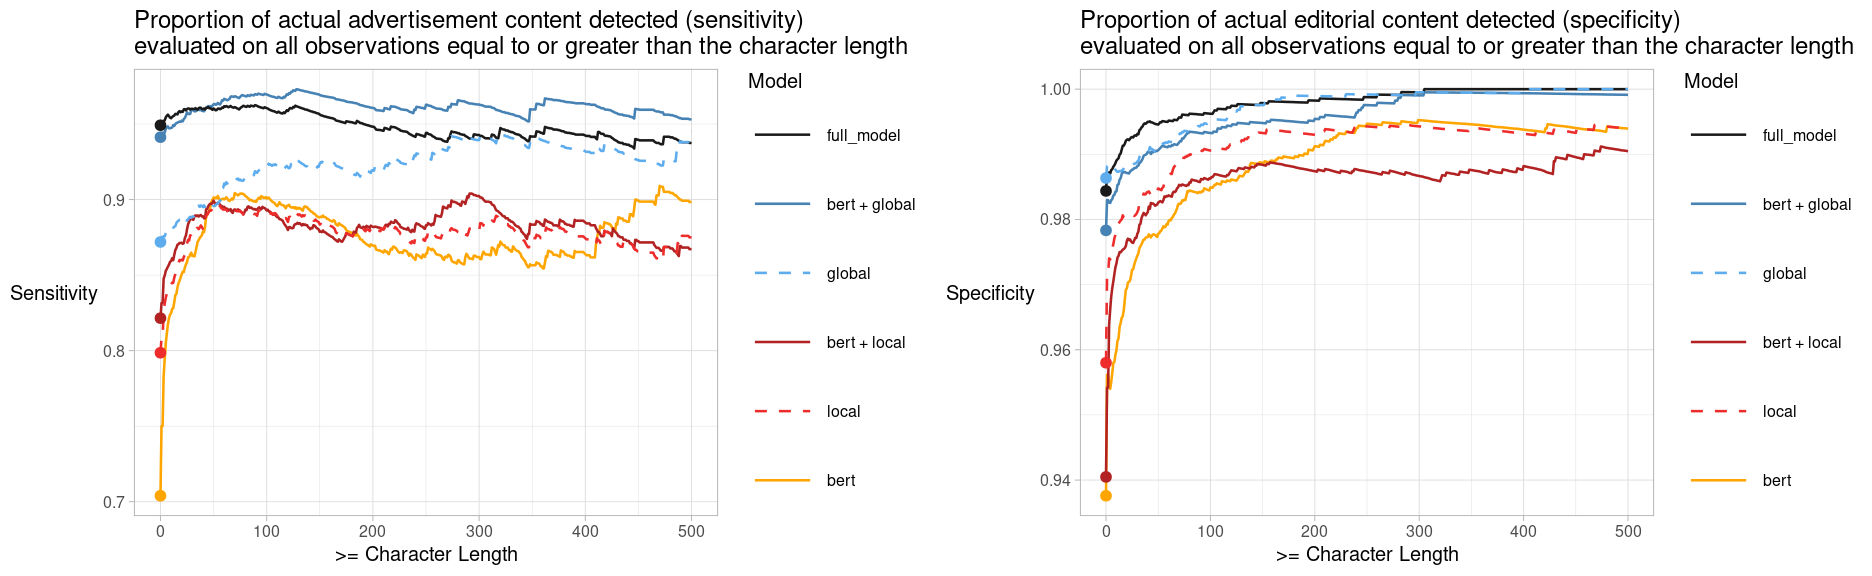 The plots above display the sensitivity and specificity respectively for all observations of equal or greater length than the specified character length on the x-axis. In general researchers tend to be interested in conducting research on editorial content. Detecting and assigning correct labels to actual editorial content (specificity) is therefore of importance.